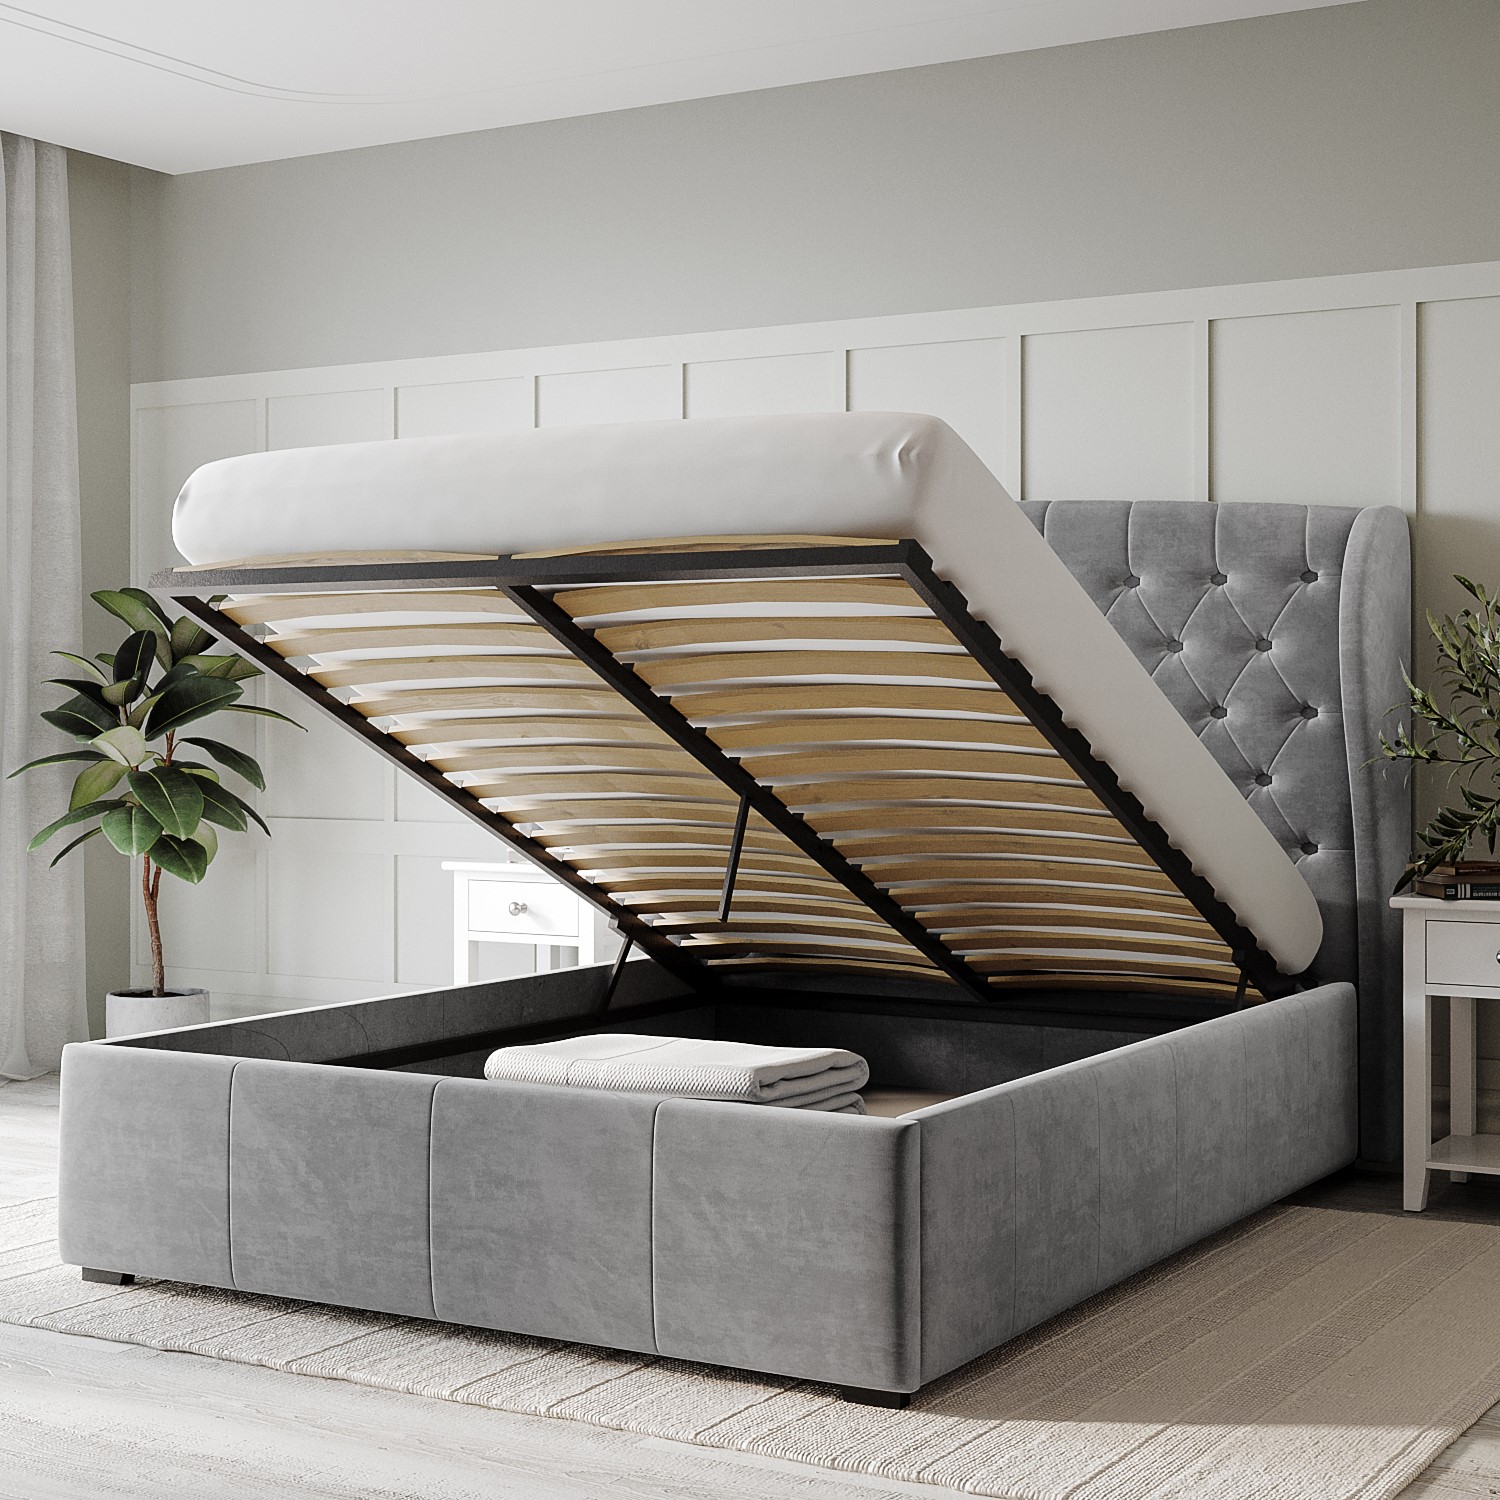 Read more about Grey velvet king size ottoman bed with winged headboard safina